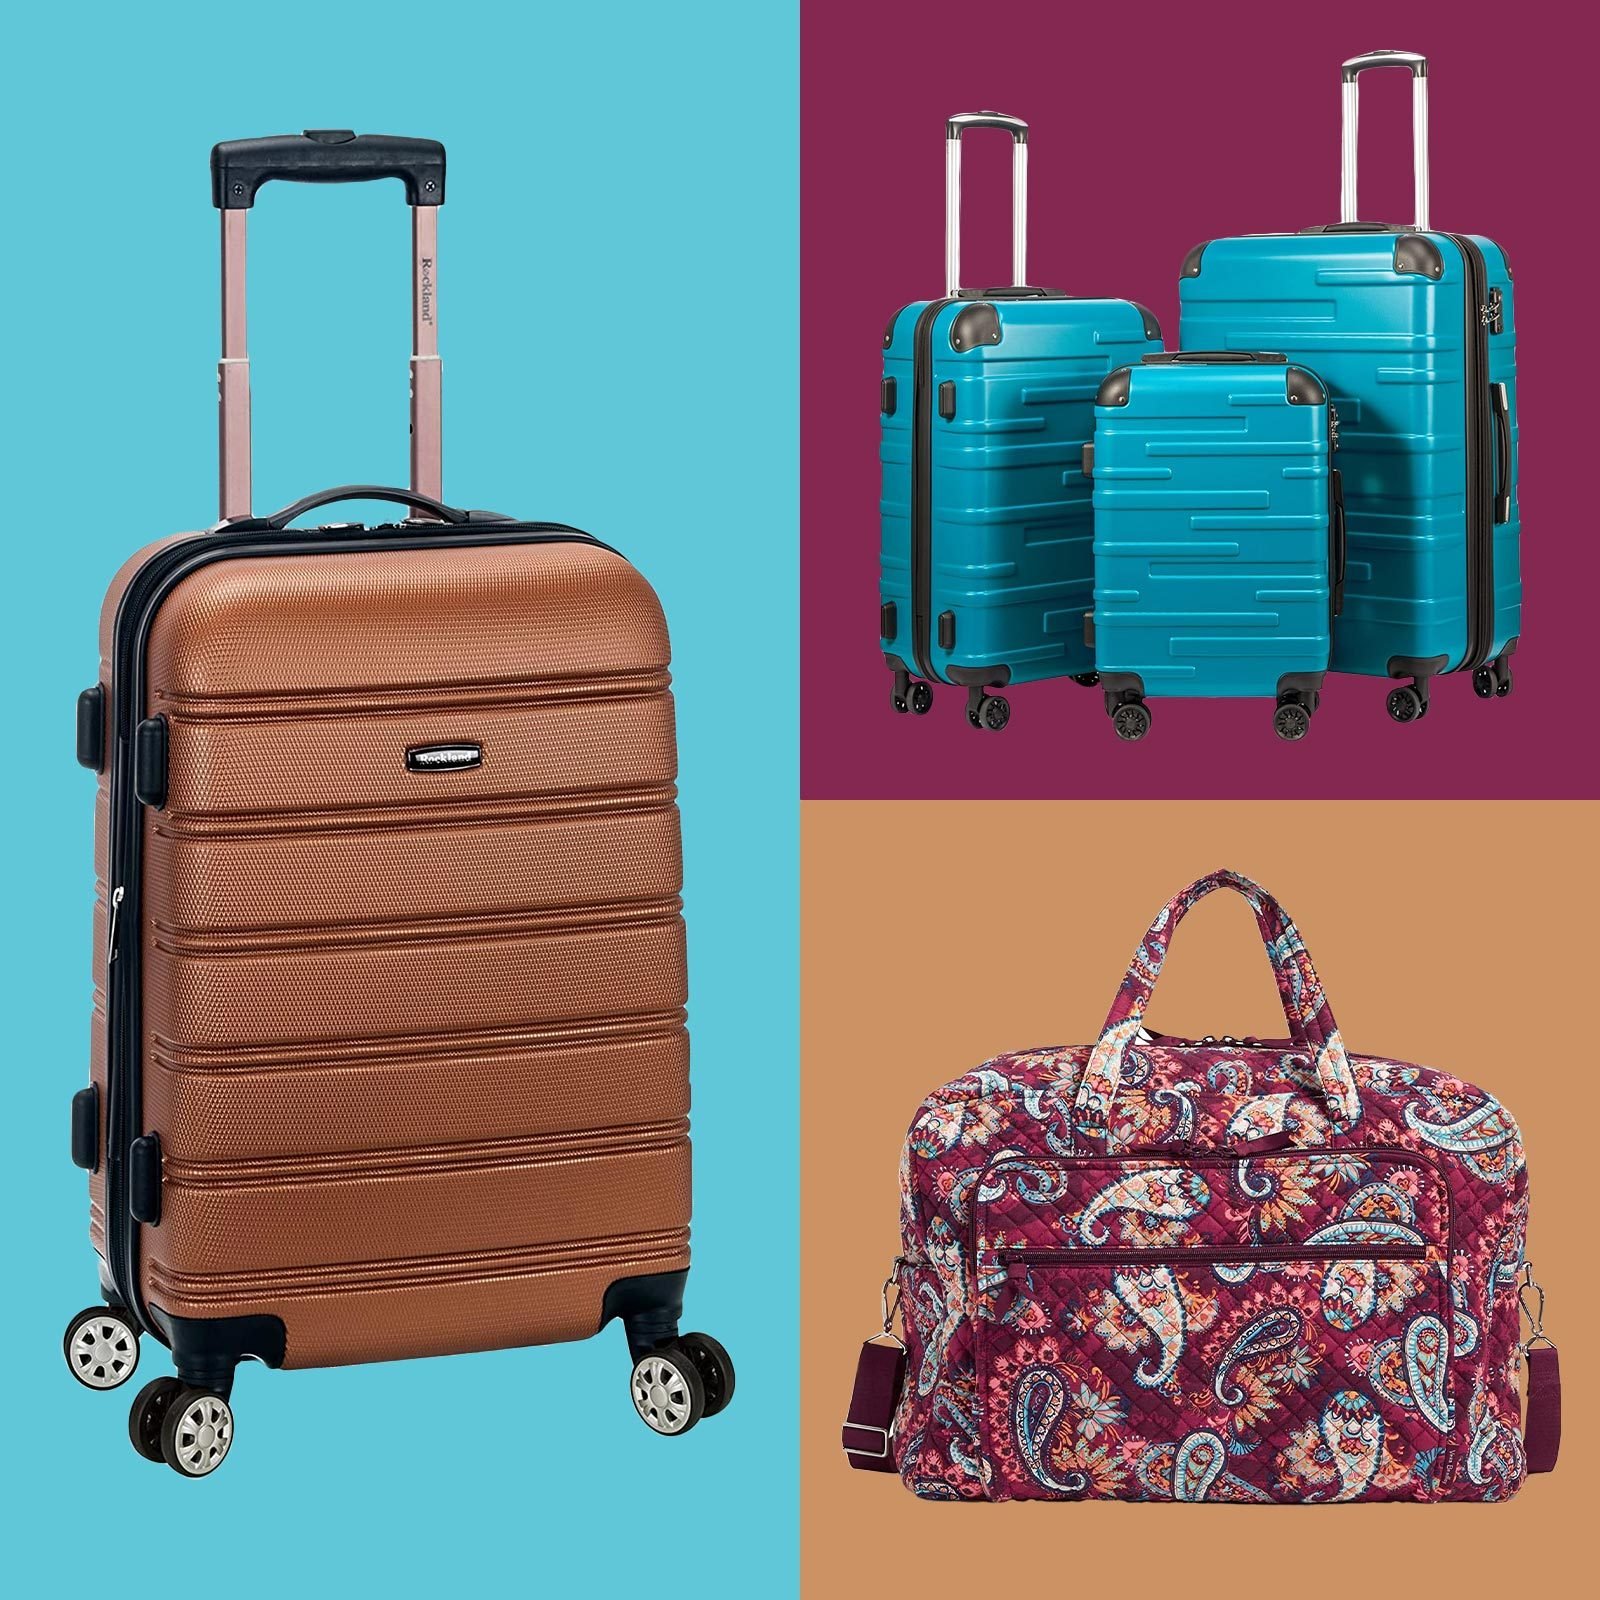 This Rockland Carry-on Makes for Perfect Kids' Luggage